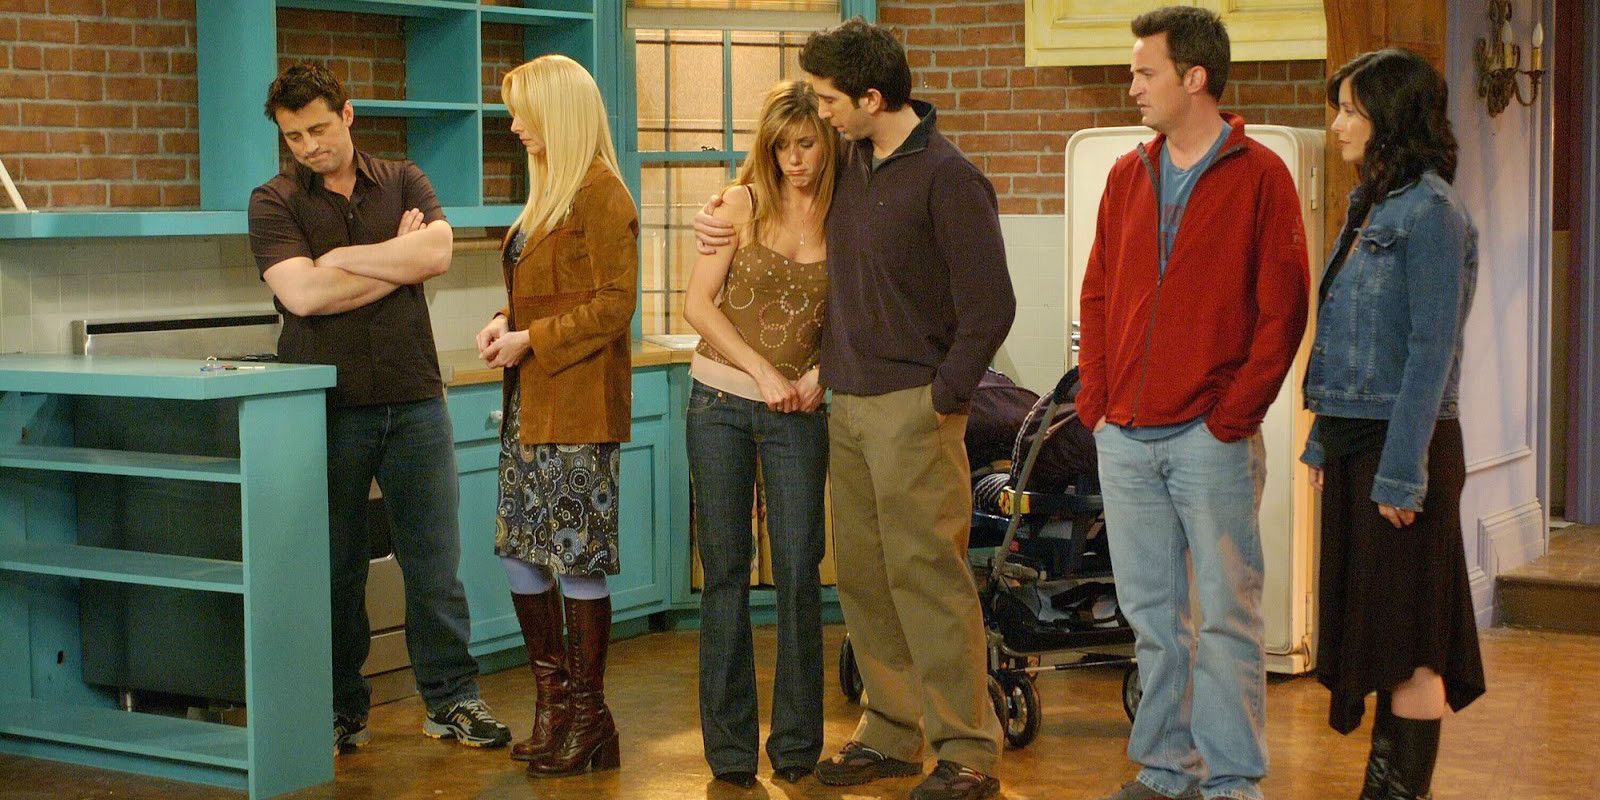 Joey, Phoebe, Rachel, Ross, Chandler and Monica standing in the apartment in the finale of Friends